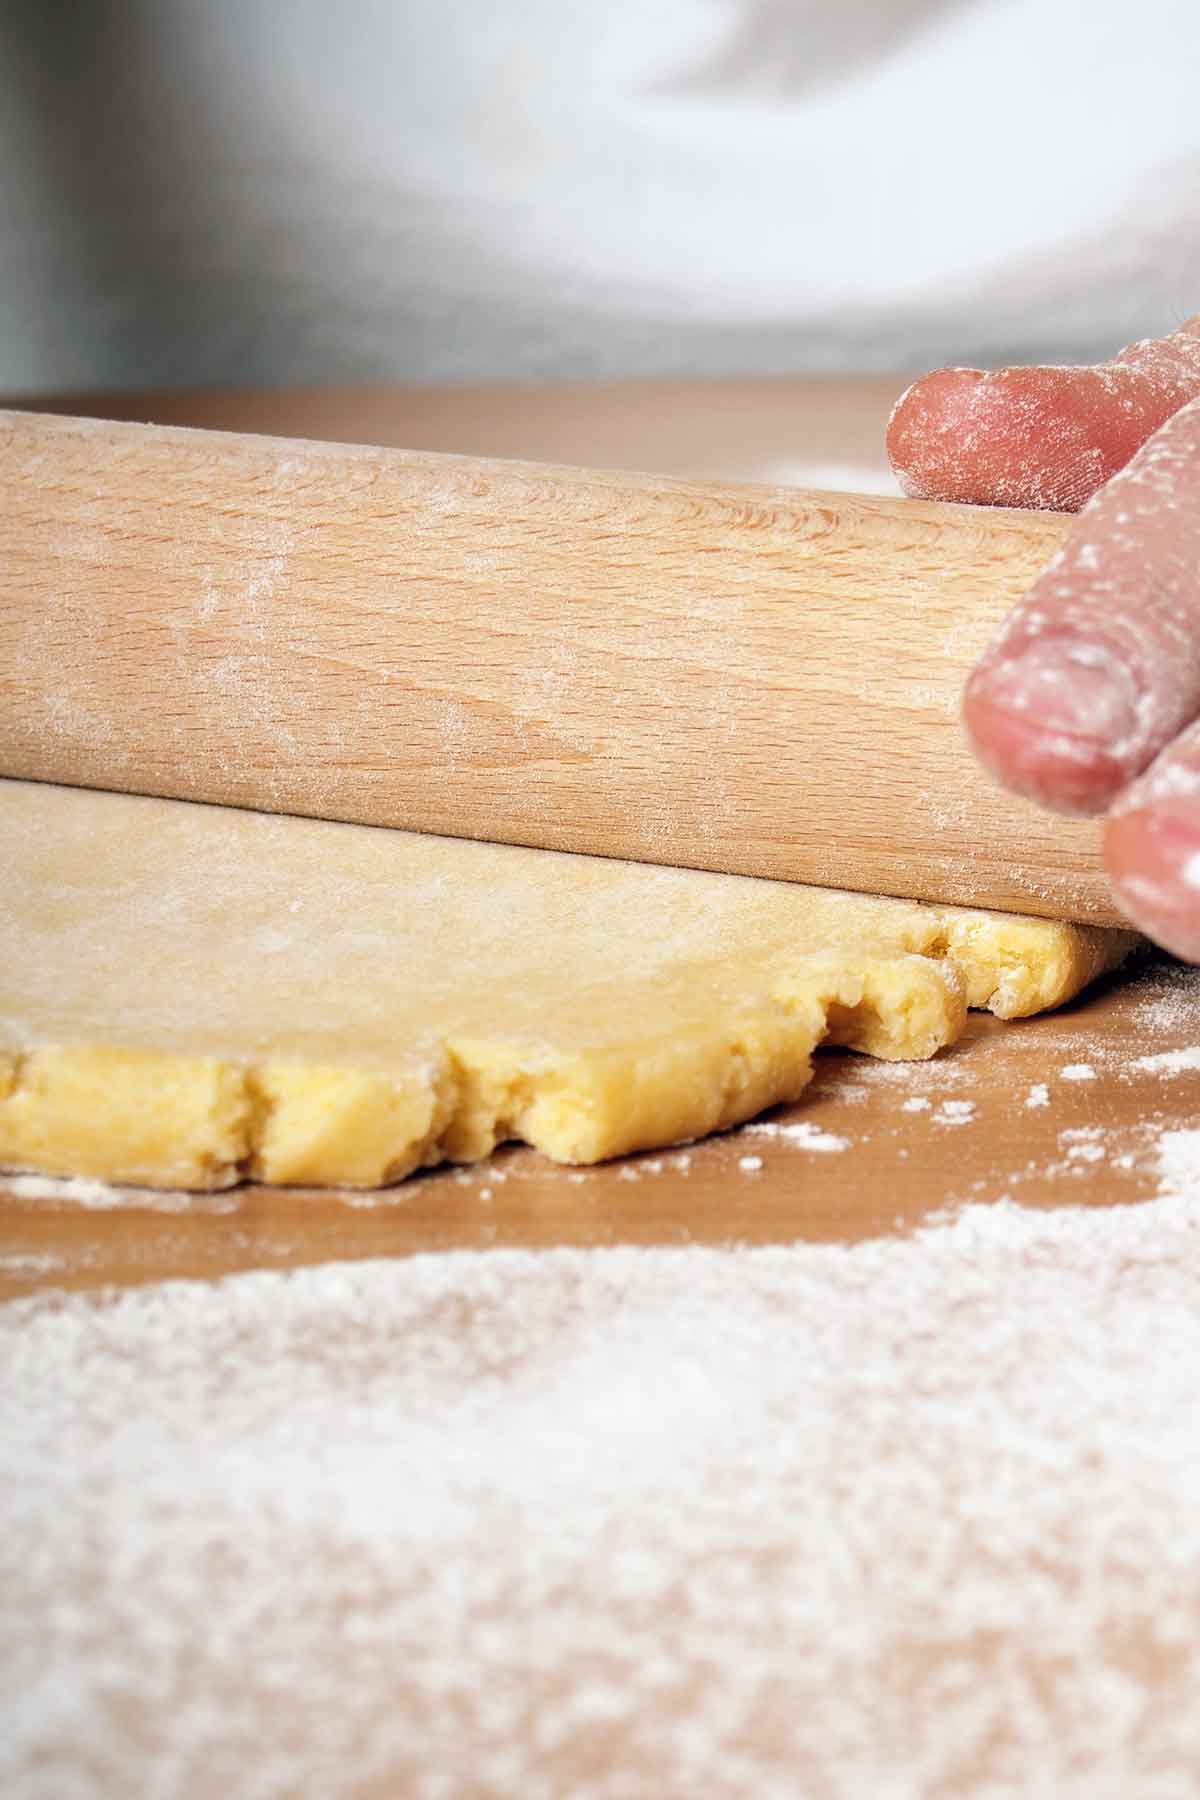 Hands rolling out pie dough.